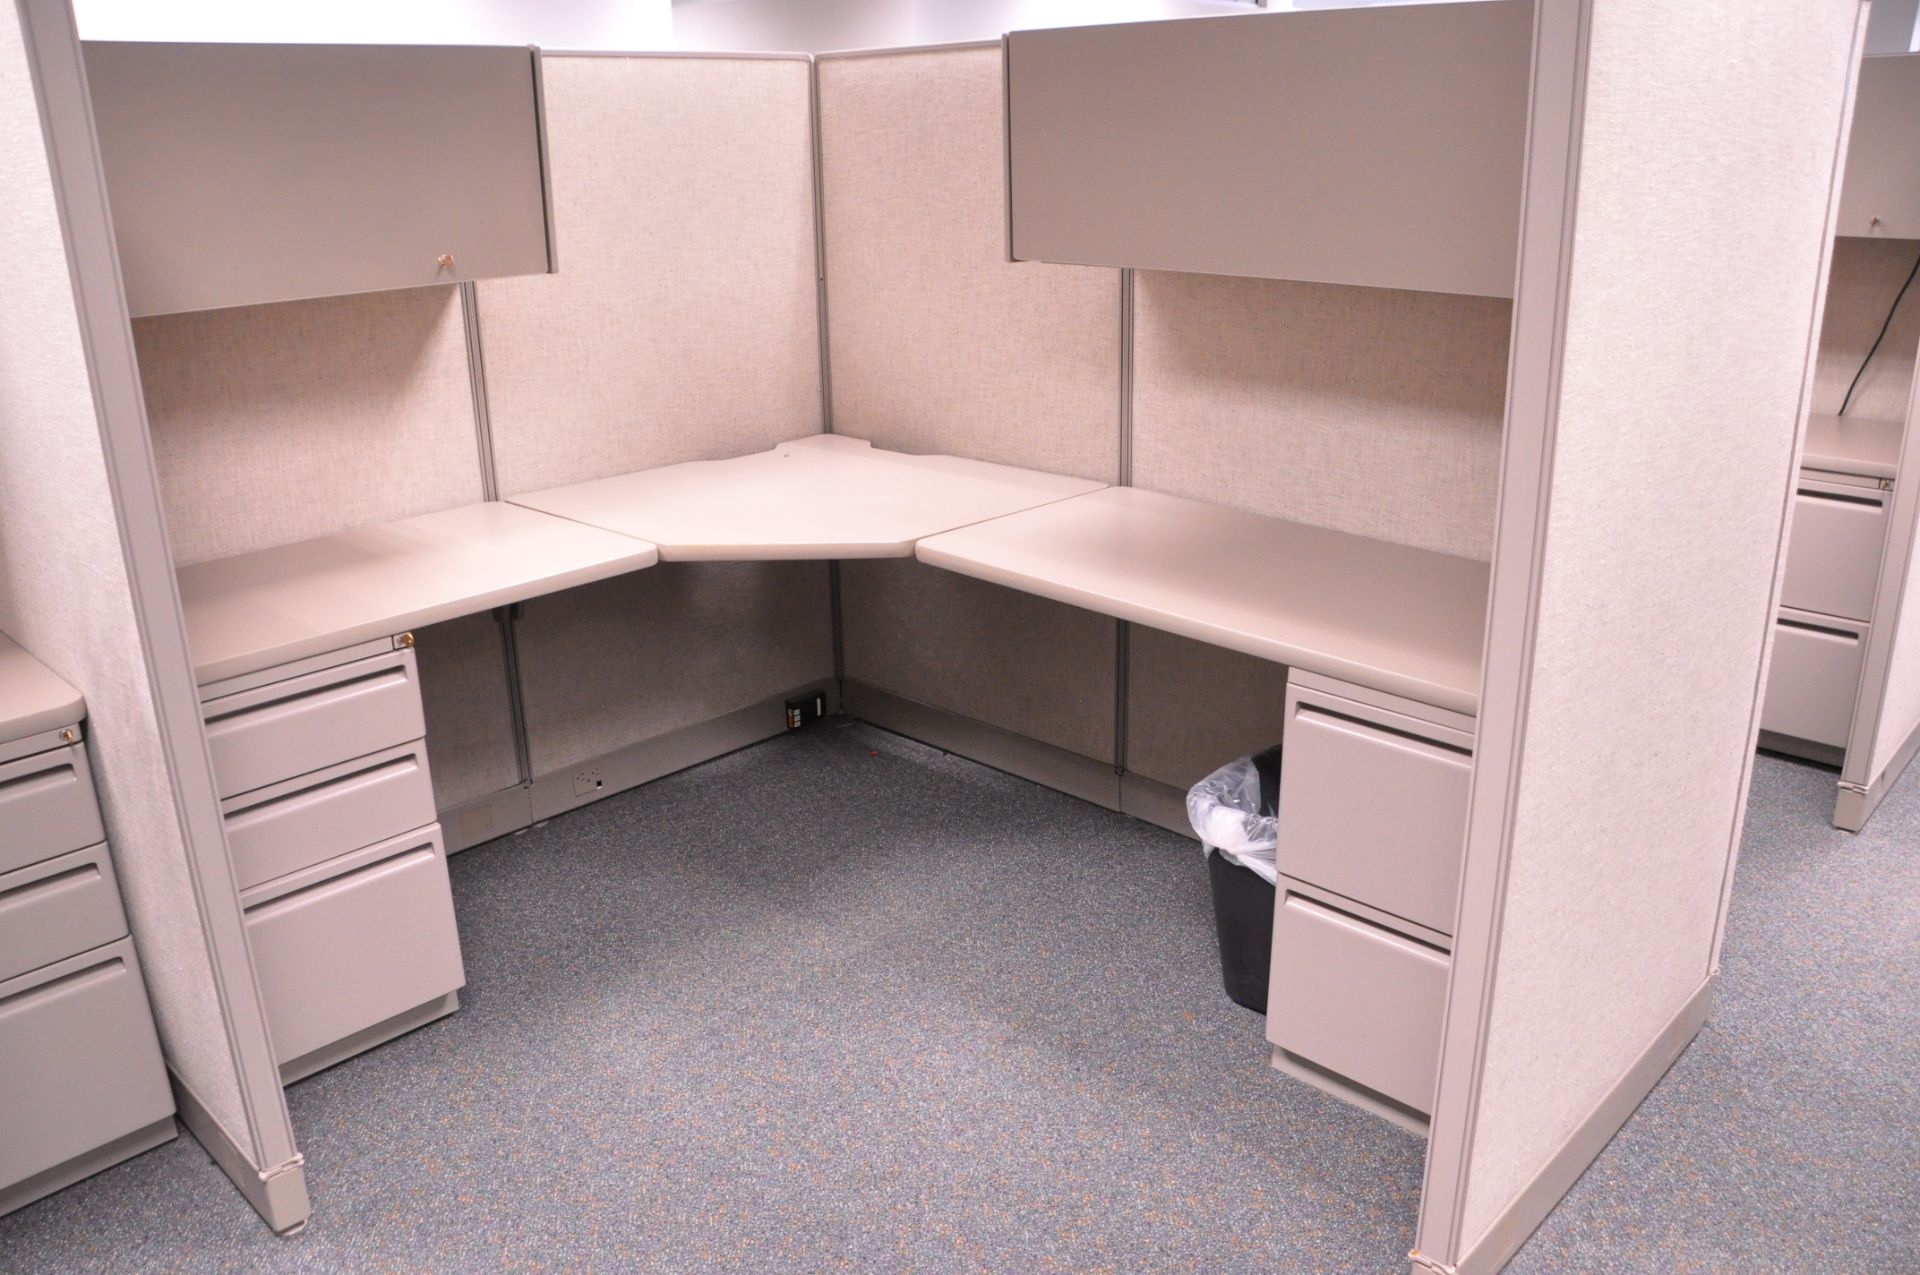 Lot-(1) 6-Station Cubicle Partition Work System with Overhead Cabinets, (No Chairs), (Located 2nd - Image 4 of 8